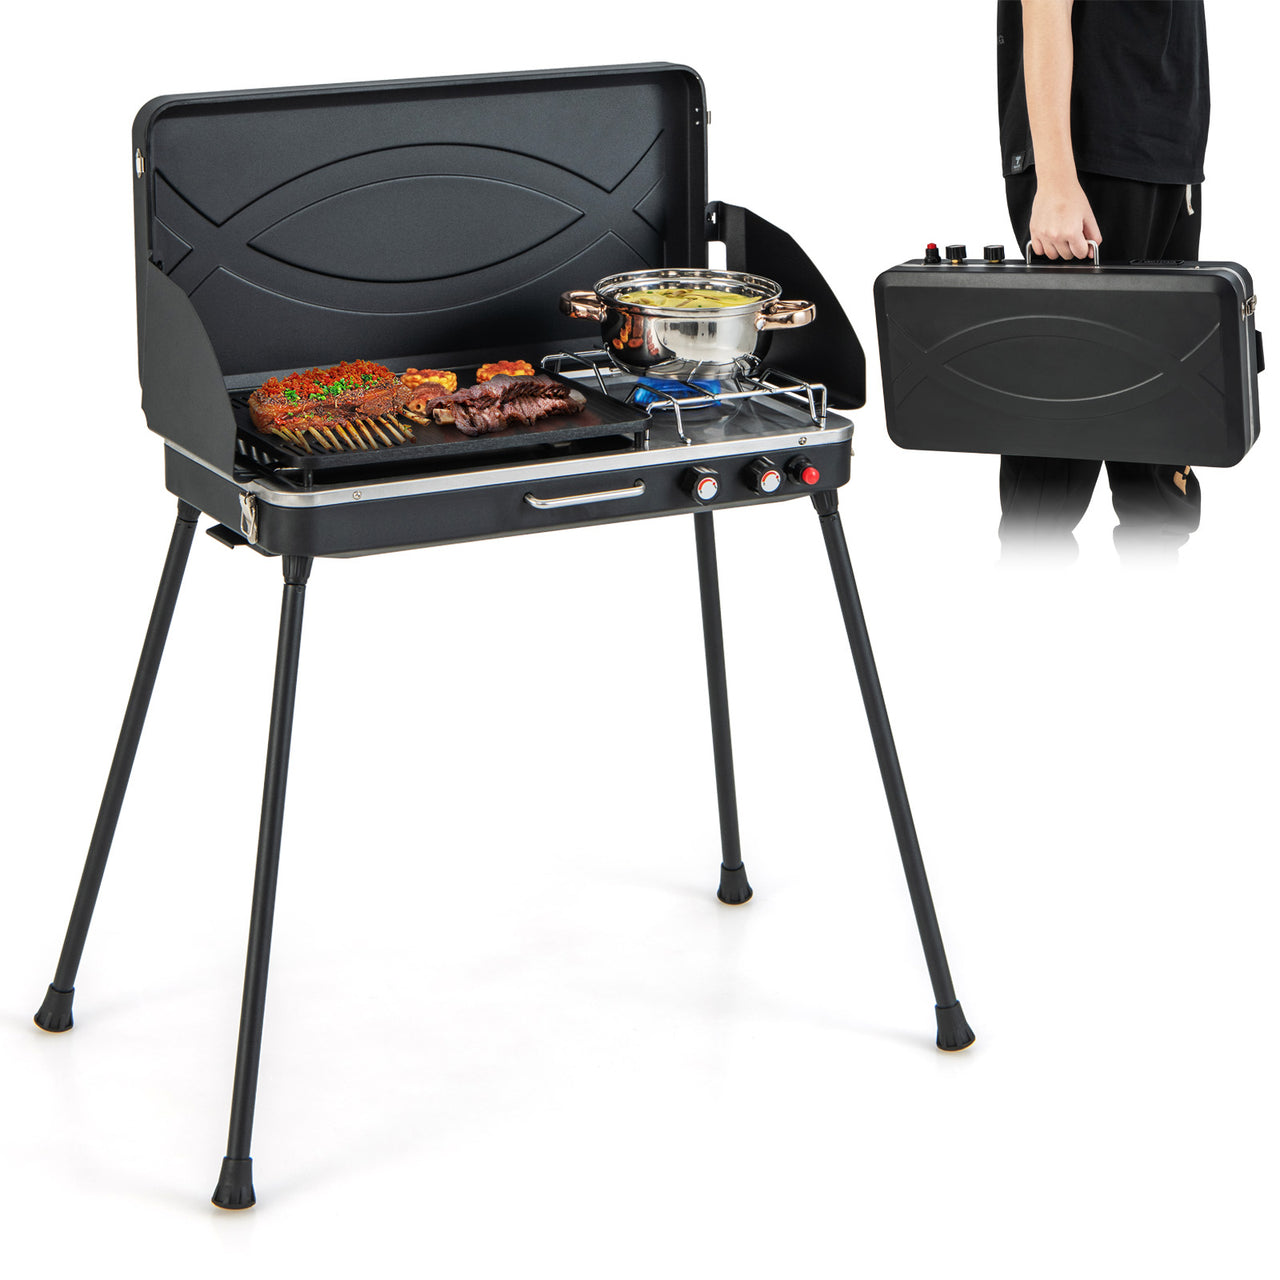 2-in-1 Gas Camping Grill and Stove with Detachable Legs - Gallery View 1 of 10